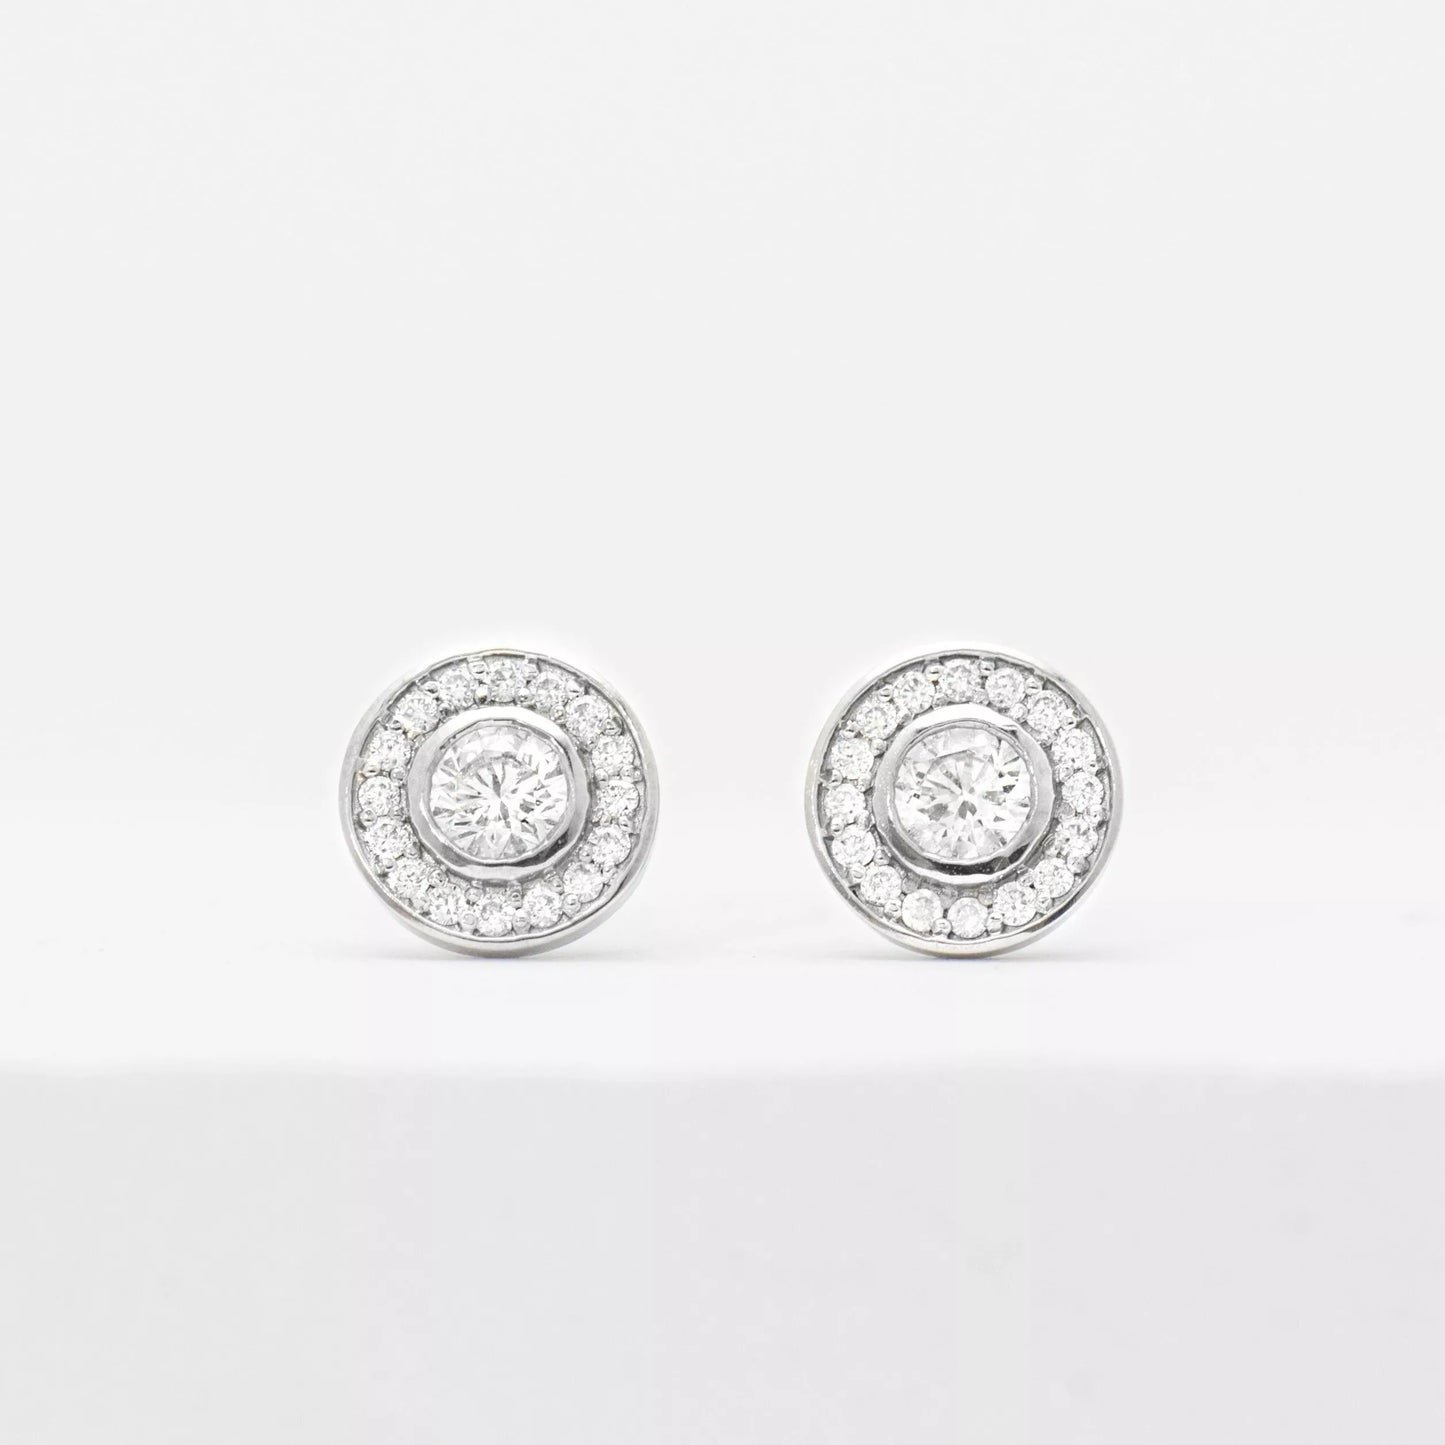 Proud Diamond White Halo Studs Earrings 14K Recycled Gold White